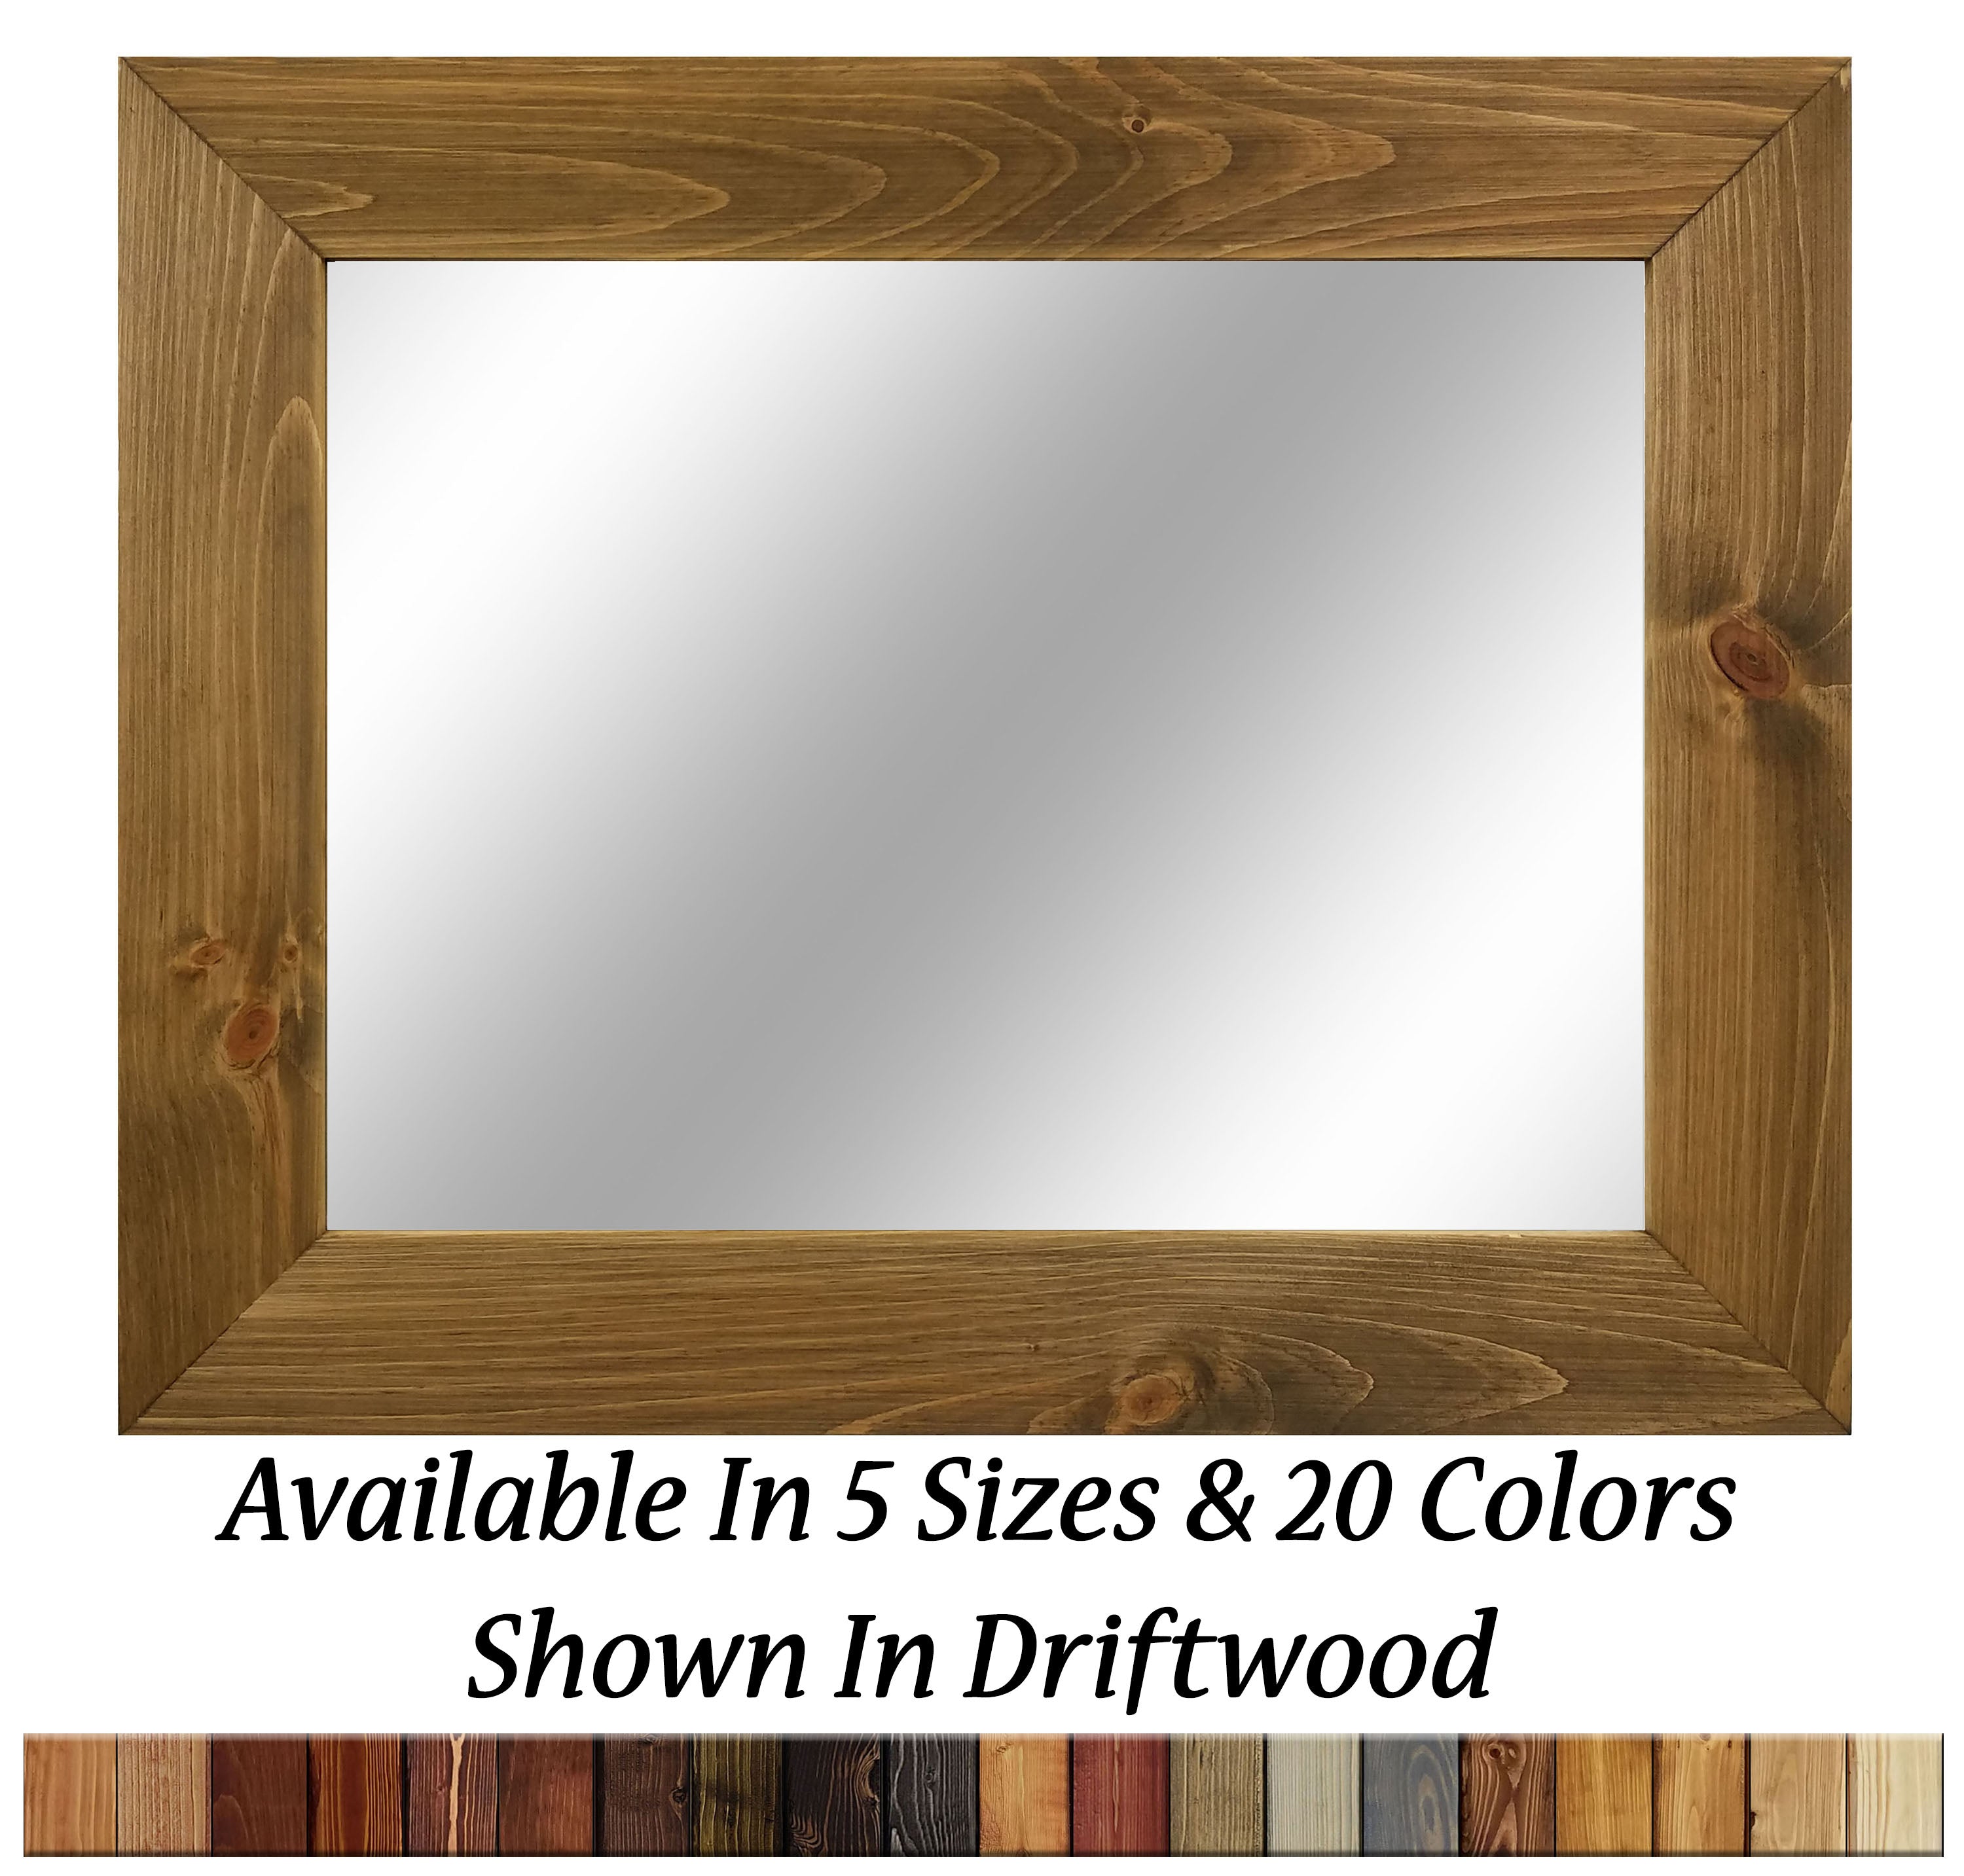 Shiplap Rustic Wood Framed Mirror, 20 Stain Colors - Shown In Driftwood